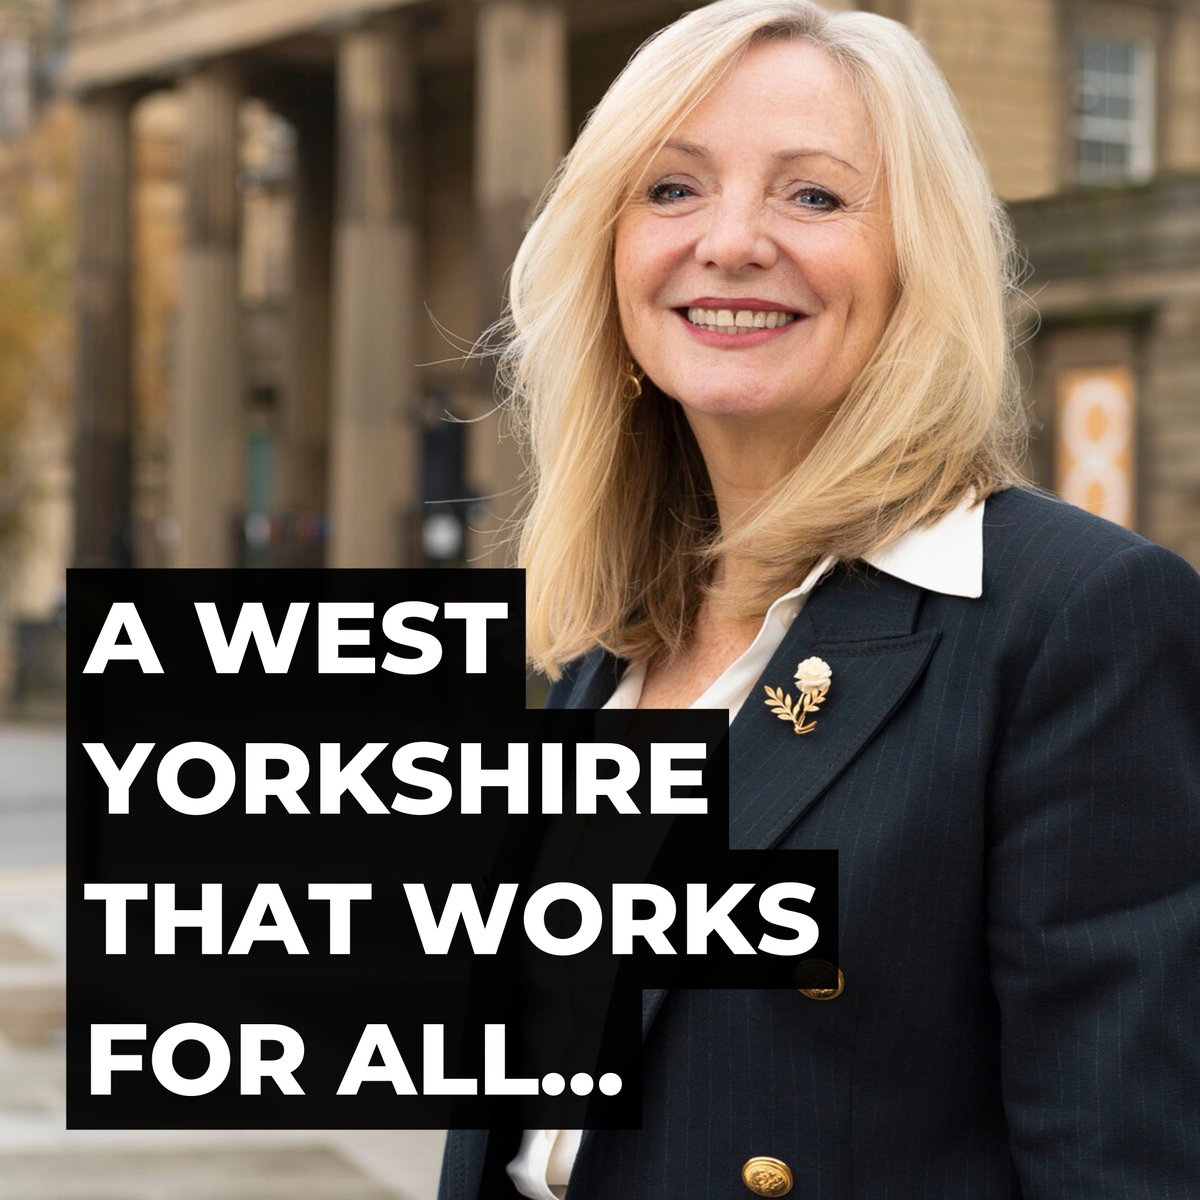 People have renewed their faith in me to continue what we’ve started, building a West Yorkshire that works for all! Here’s how we’ll be doing that: 🚎 Local control of buses and spades in the ground on a tram system. 🧮 A region of learning with a new skills and training